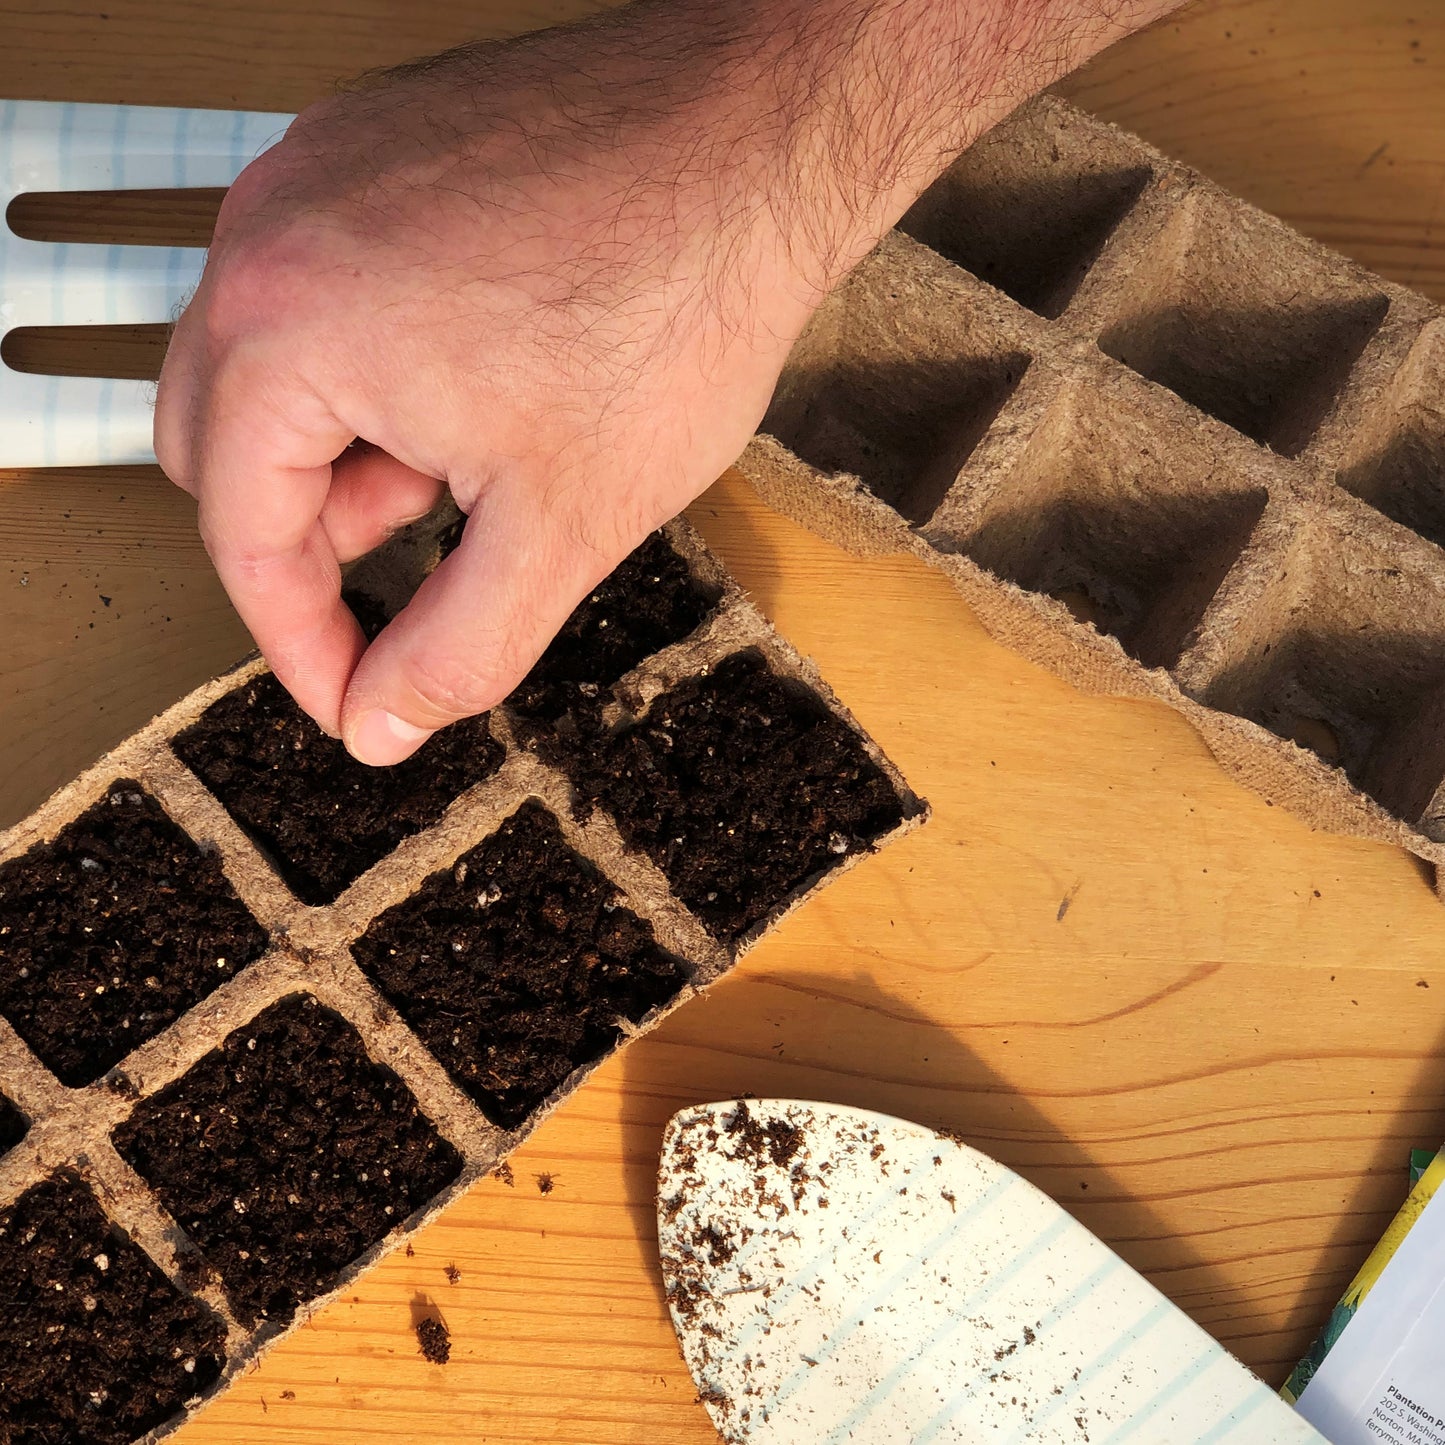 Start your Organic Straight Eight Cucumber seeds in biodegradable Jiffy peat strip trays filled with a sowing medium of your choosing.